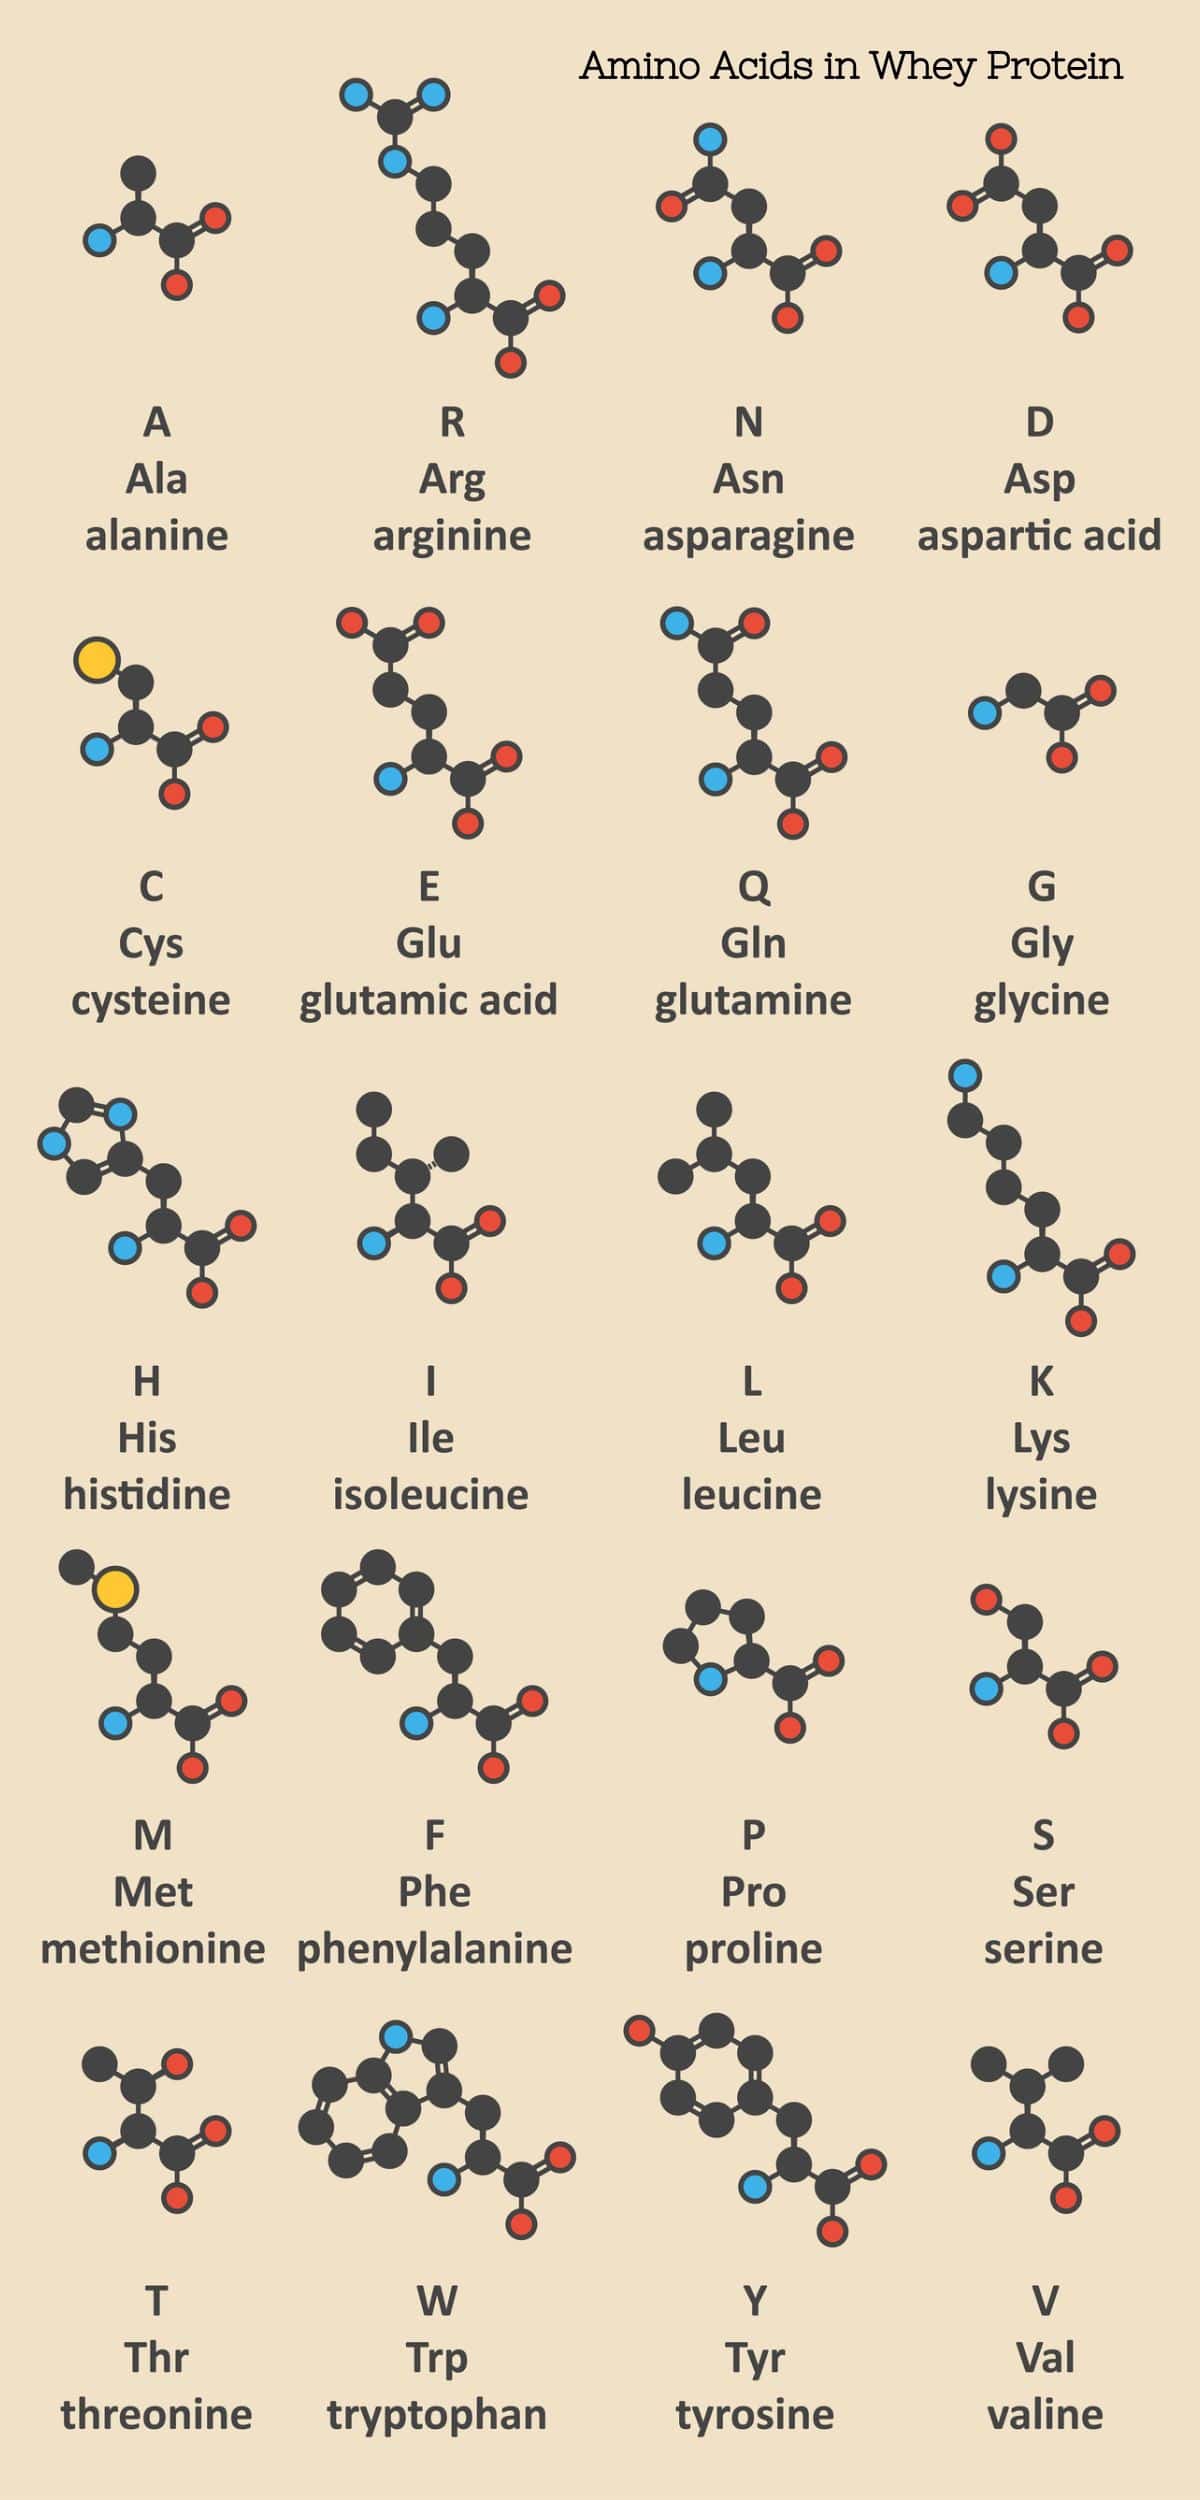 Illustration of various amino acids molecular structures with their names and single-letter codes, representing the amino acid profile found in whey protein.